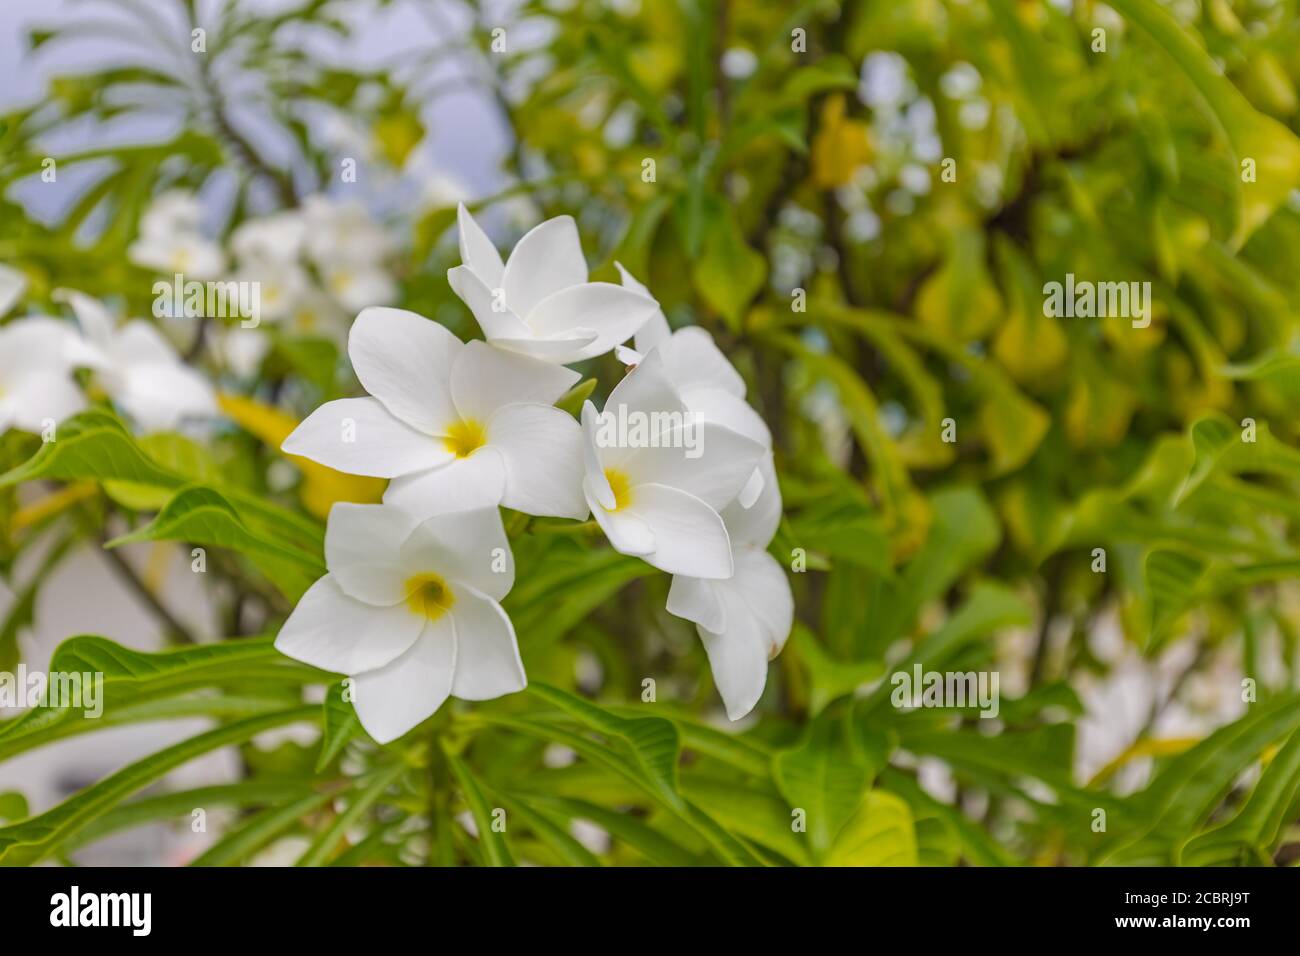 Frangipani, plumeria seamless tropical pattern. Colorful bright flower nature. Natural floral background. Flower stalk and leaves. Stock Photo